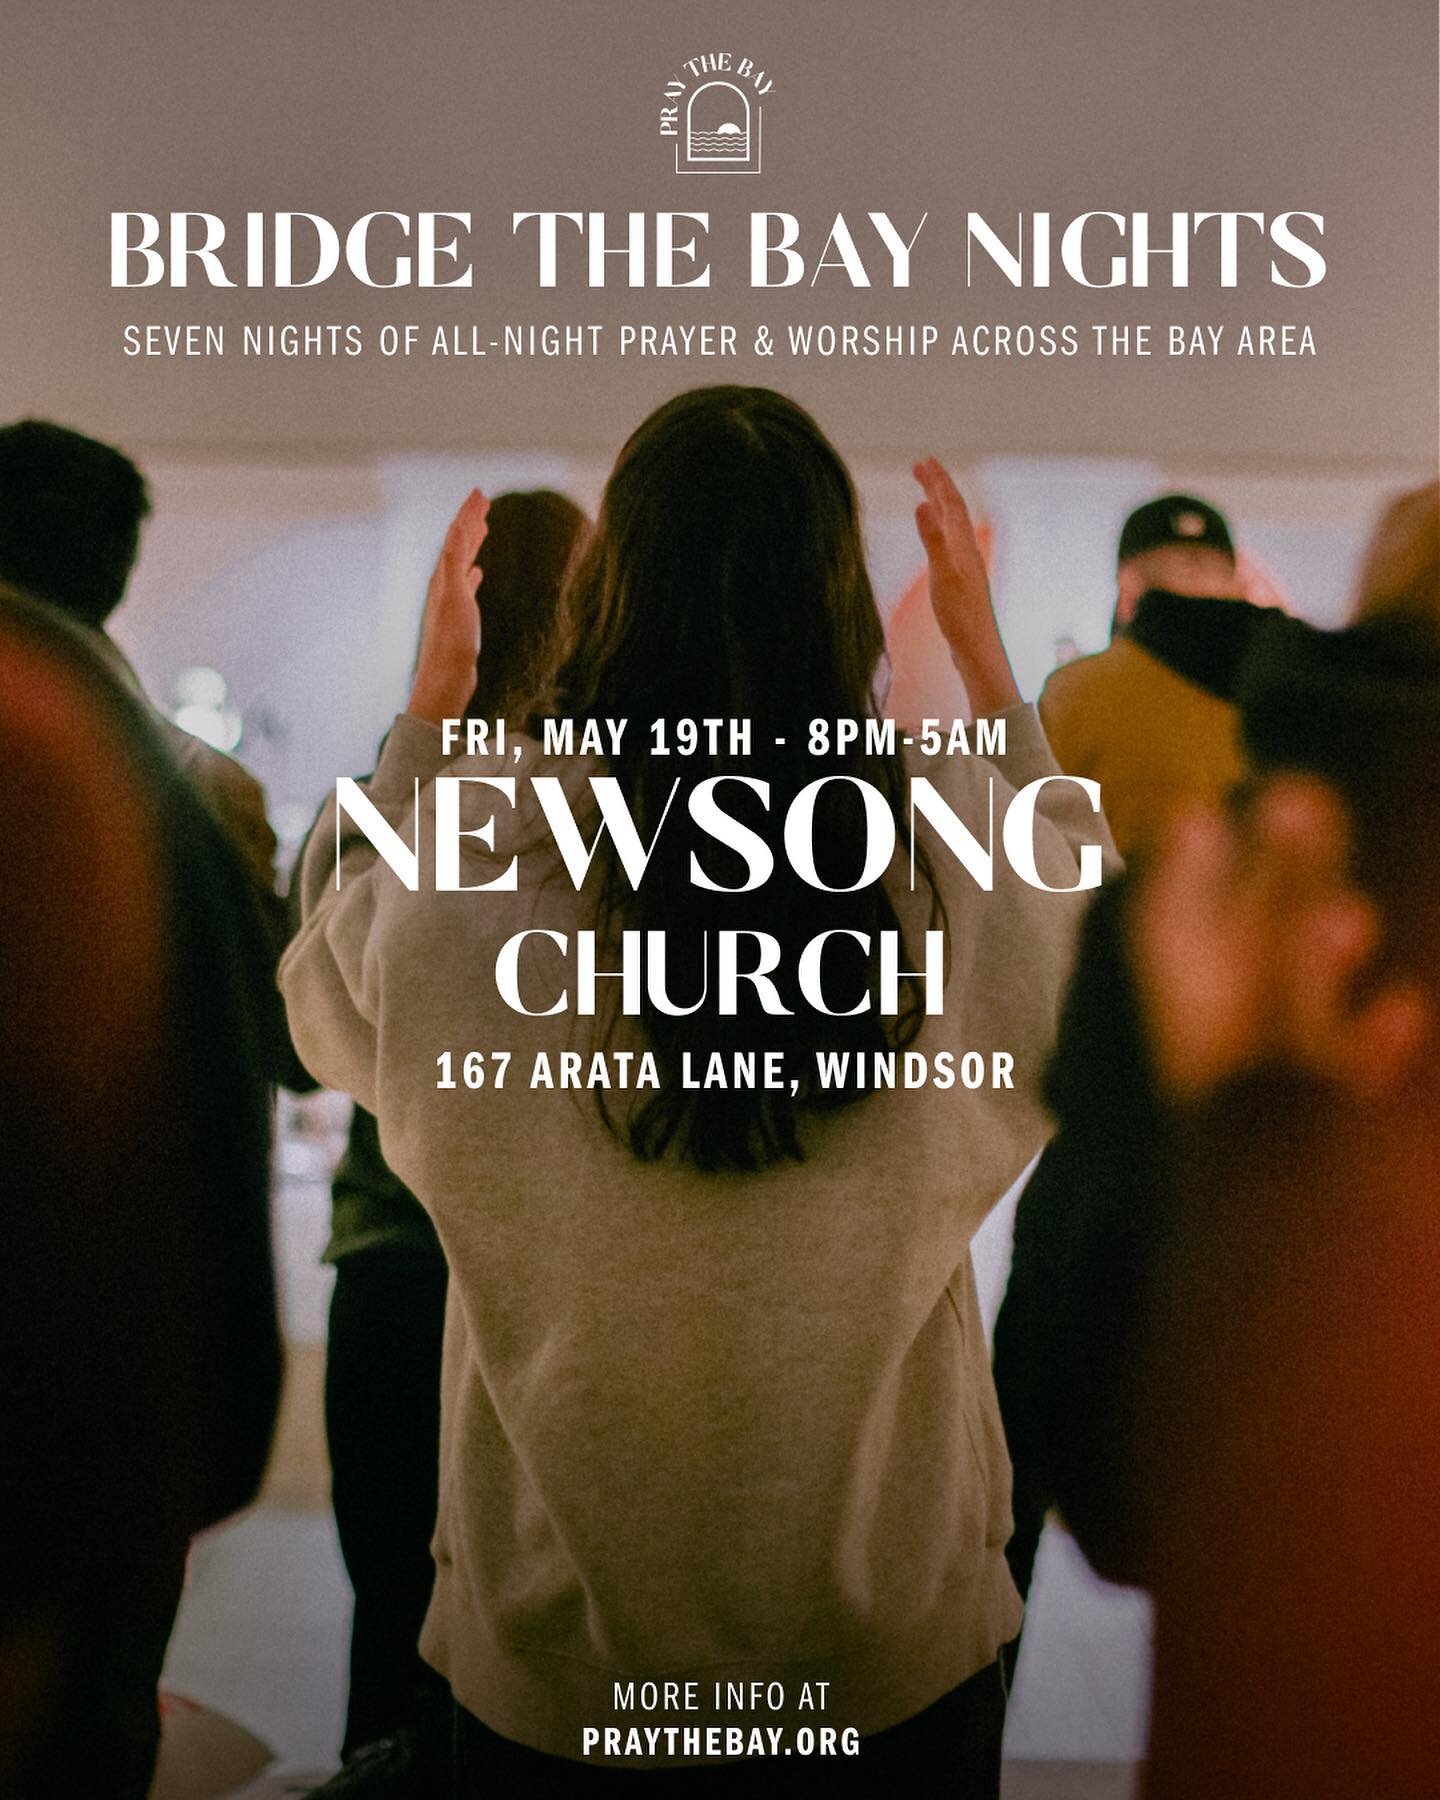 BRIDGE THE BAY NIGHTS

NEXT STOP: 
@newsongwindsor
167 Arata Lane, Windsor
This Friday the 19th

In the Windsor, we will be having:

WORSHIP NIGHT 🙌 - 7:30 - 10:30PM
Worship &amp; prayer led by a collective of believers from across each local area.
